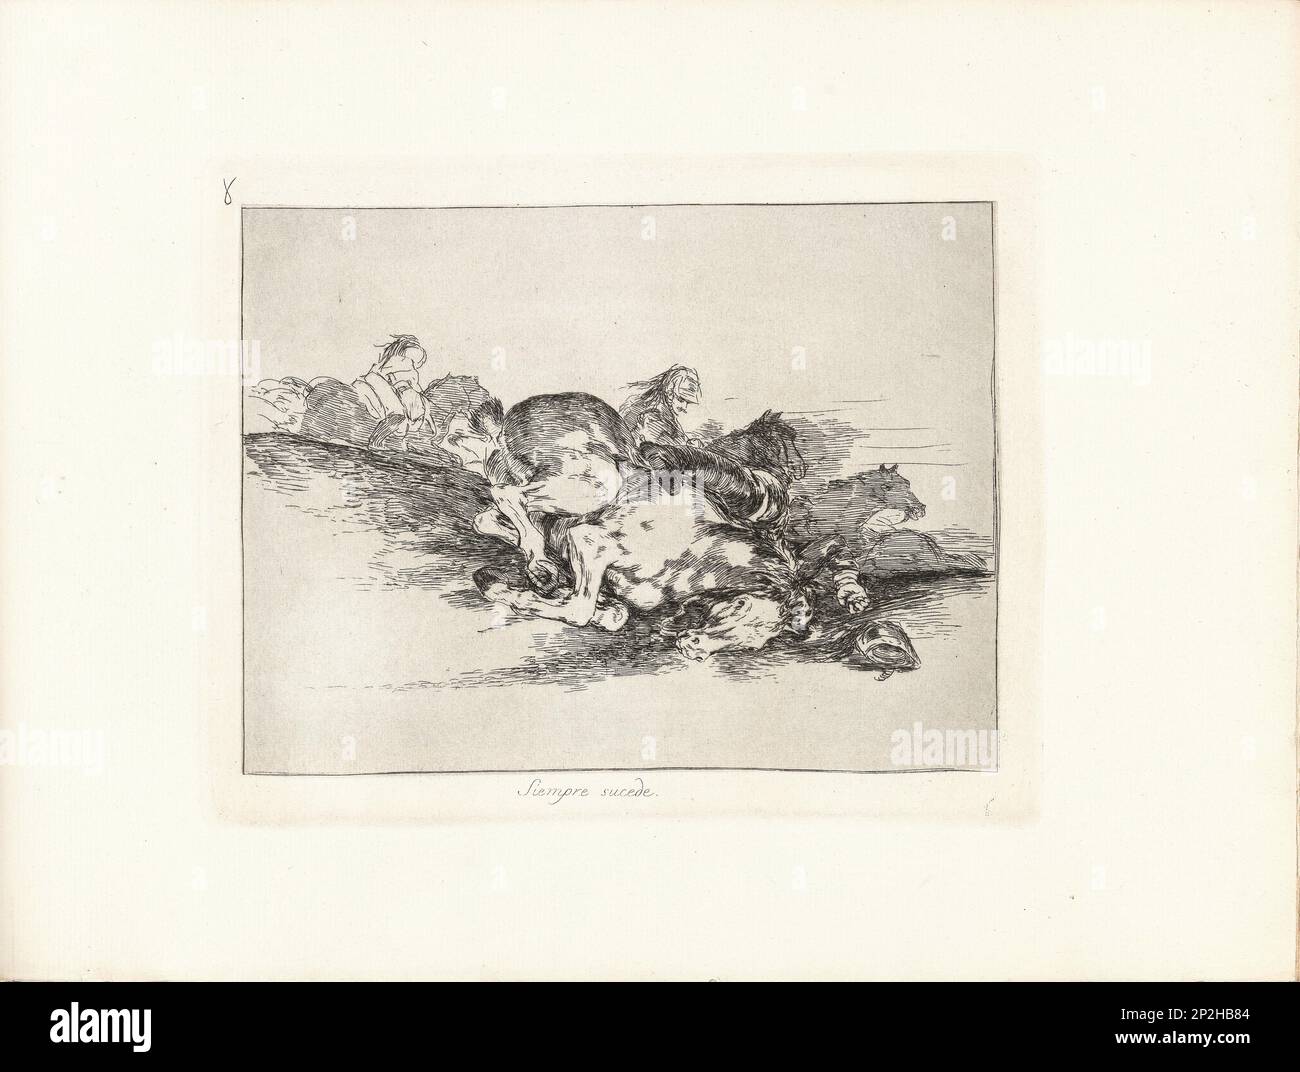 Los Desastres de la Guerra (The Disasters of War), Plate 8: Siempre sucede (This always happens), 1810s. Private Collection. Stock Photo